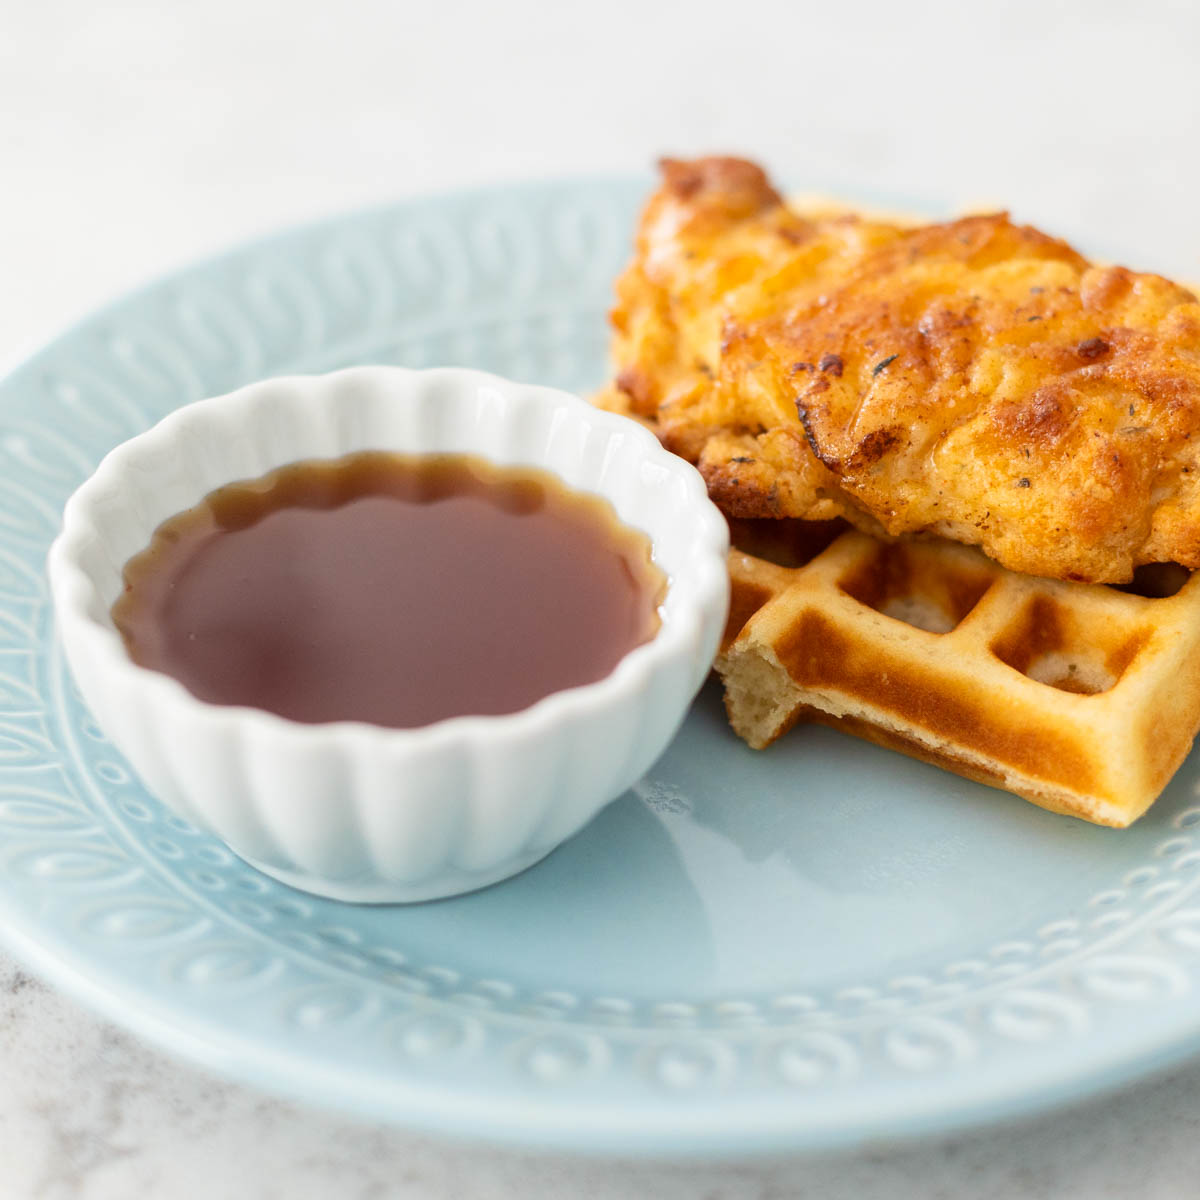 A cup of sauce sits on a plate next to a fried chicken tender on a waffle.